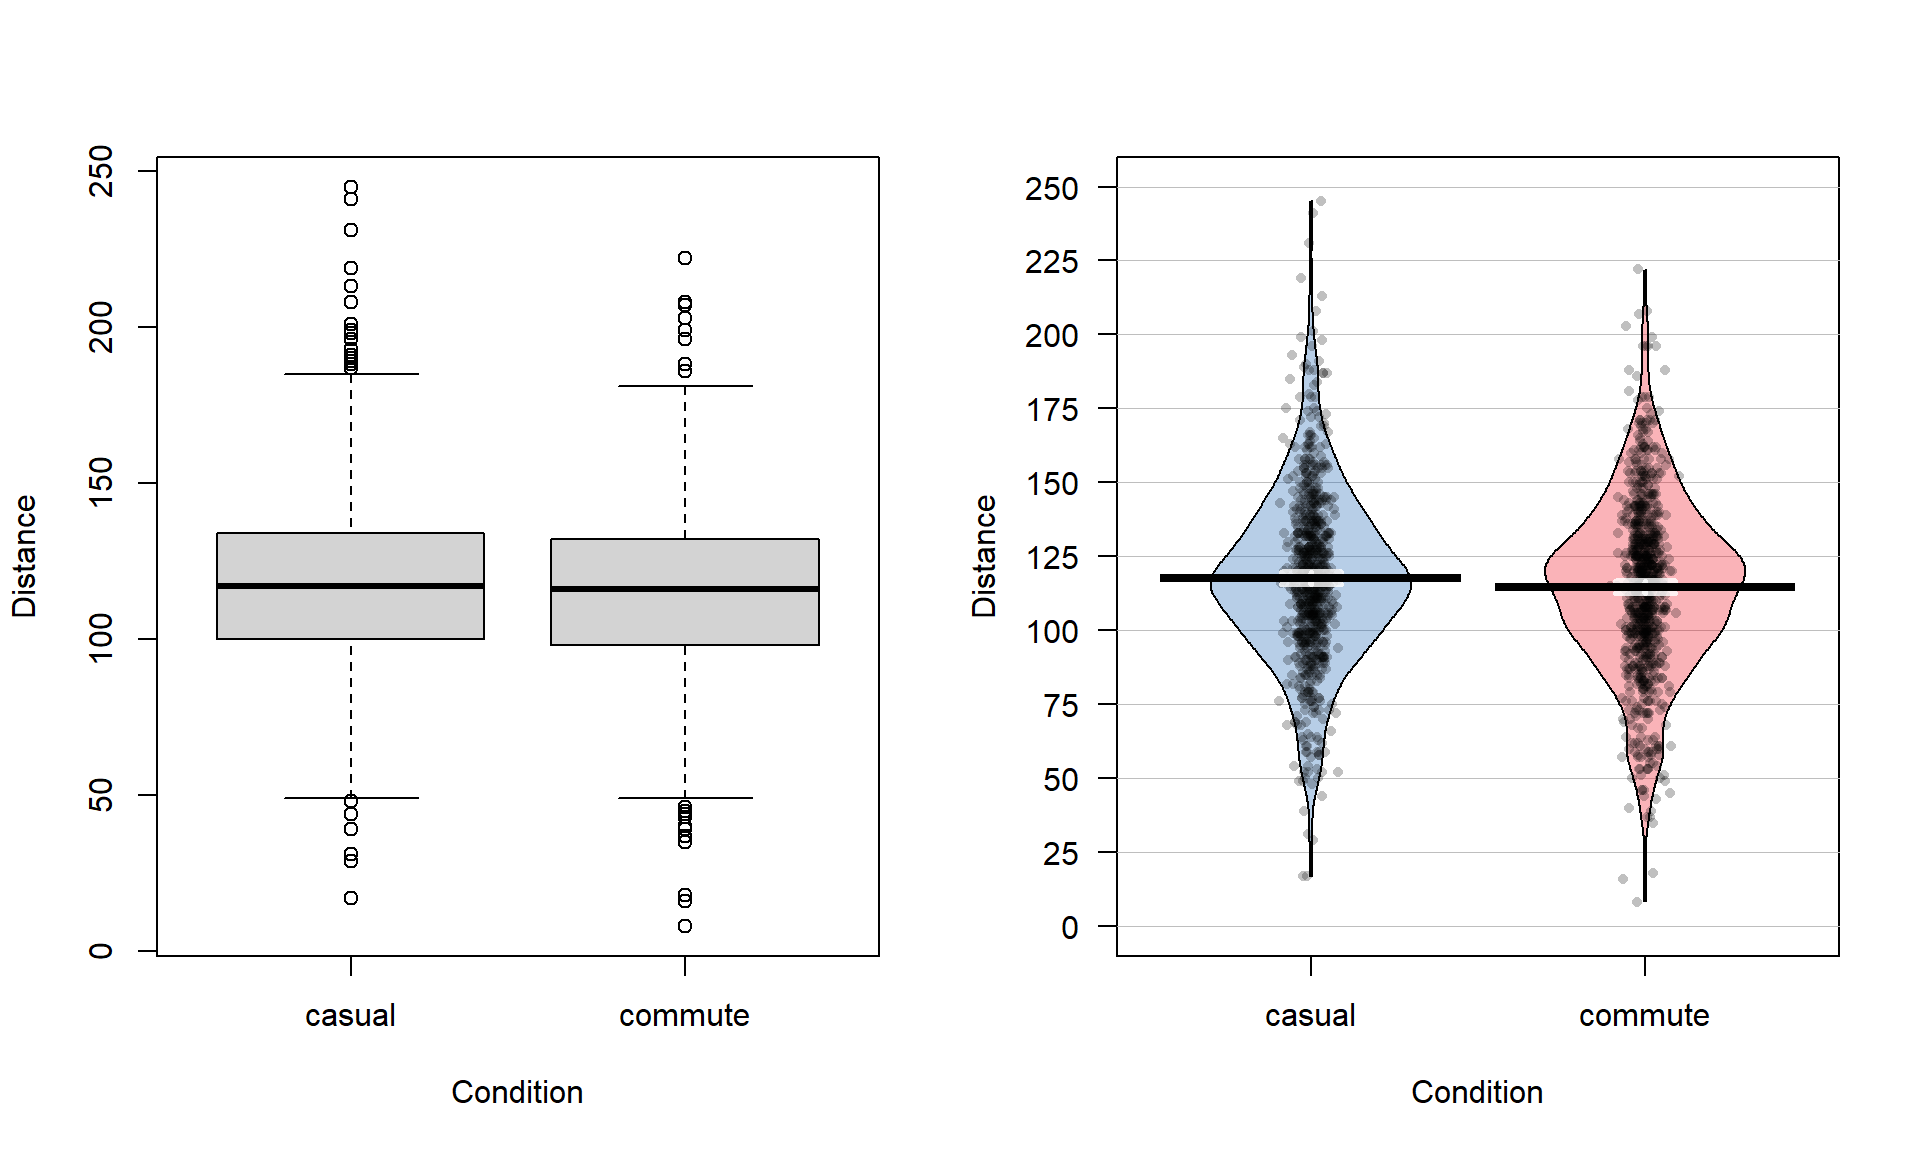 Boxplot and pirate-plot of the Distance responses on the reduced ddsub data set.